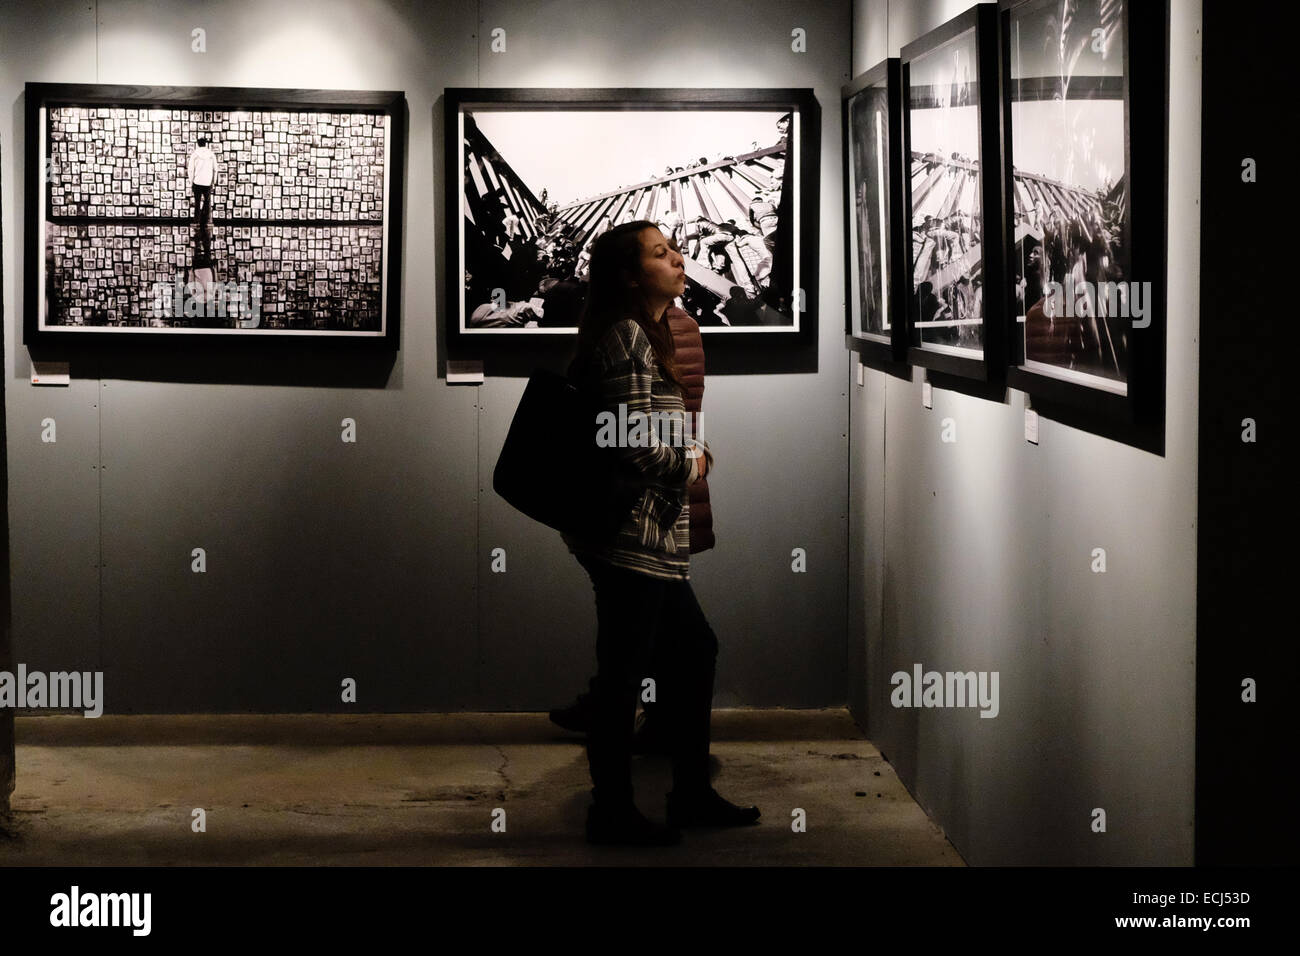 Writing With Light photography exhibition by photographer Ziv Koren on display at the Tel-Aviv Port. Stock Photo